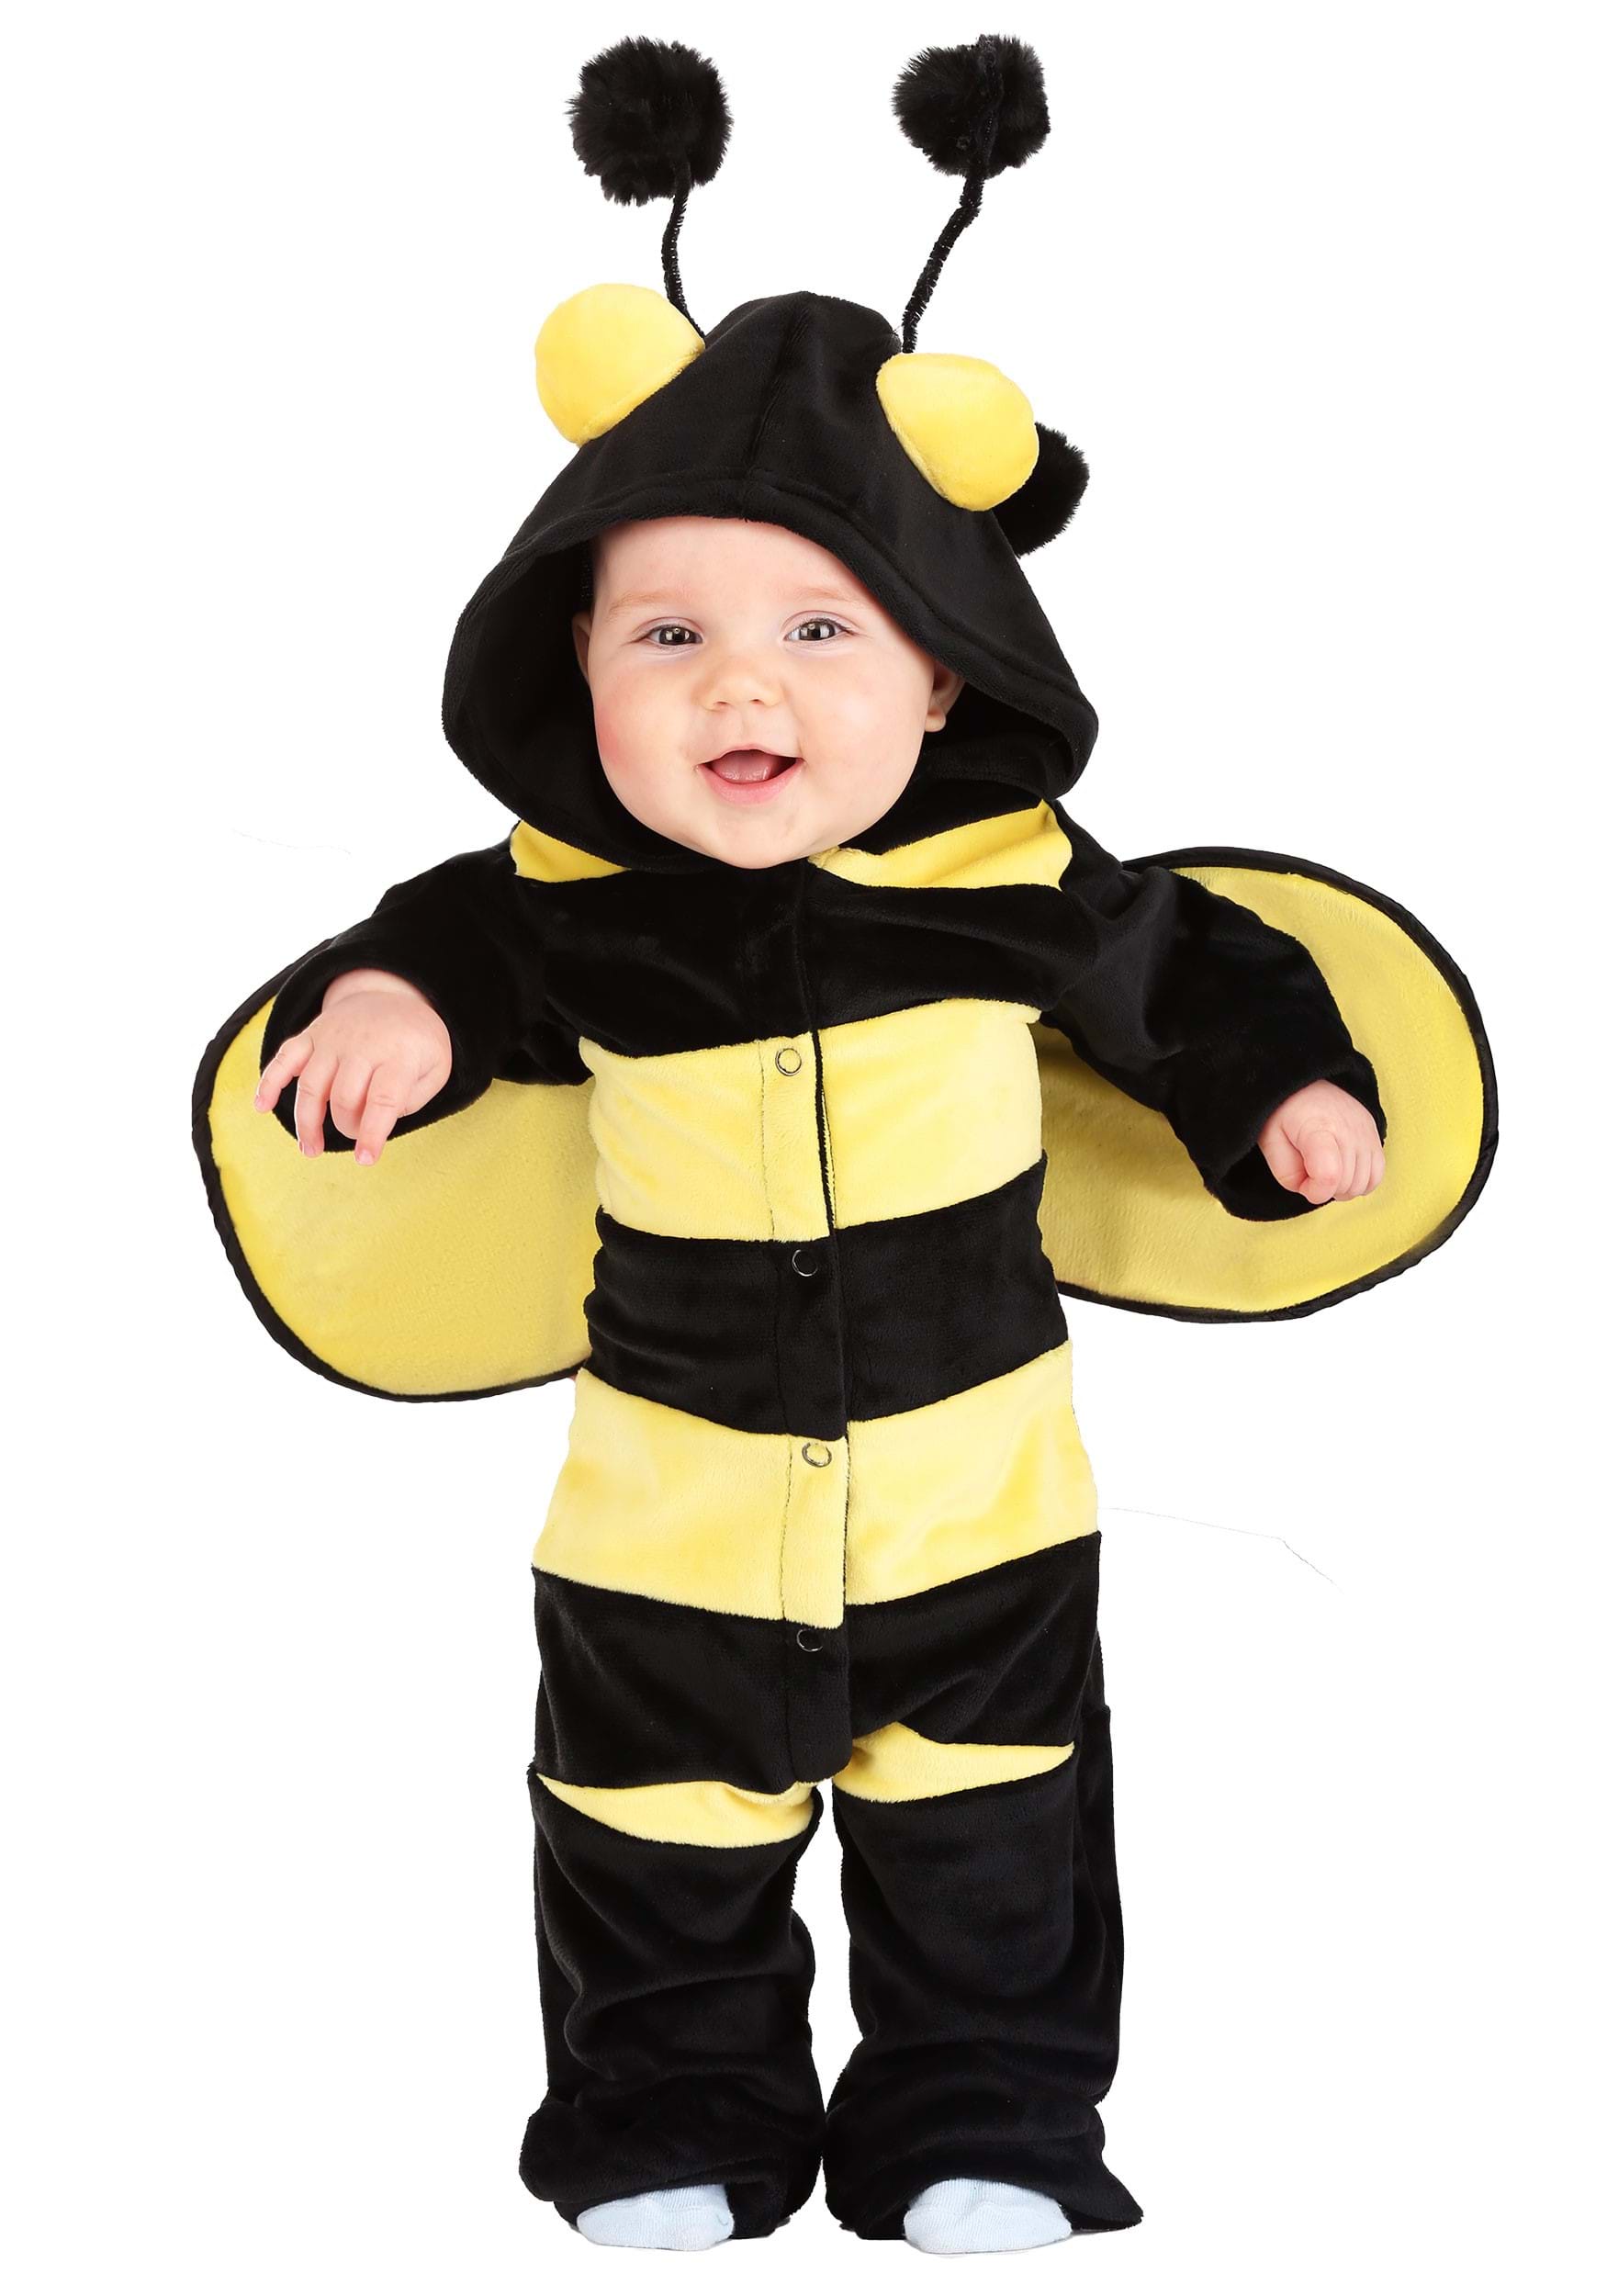 Buzzing Bumble Bee Costume For Infant's